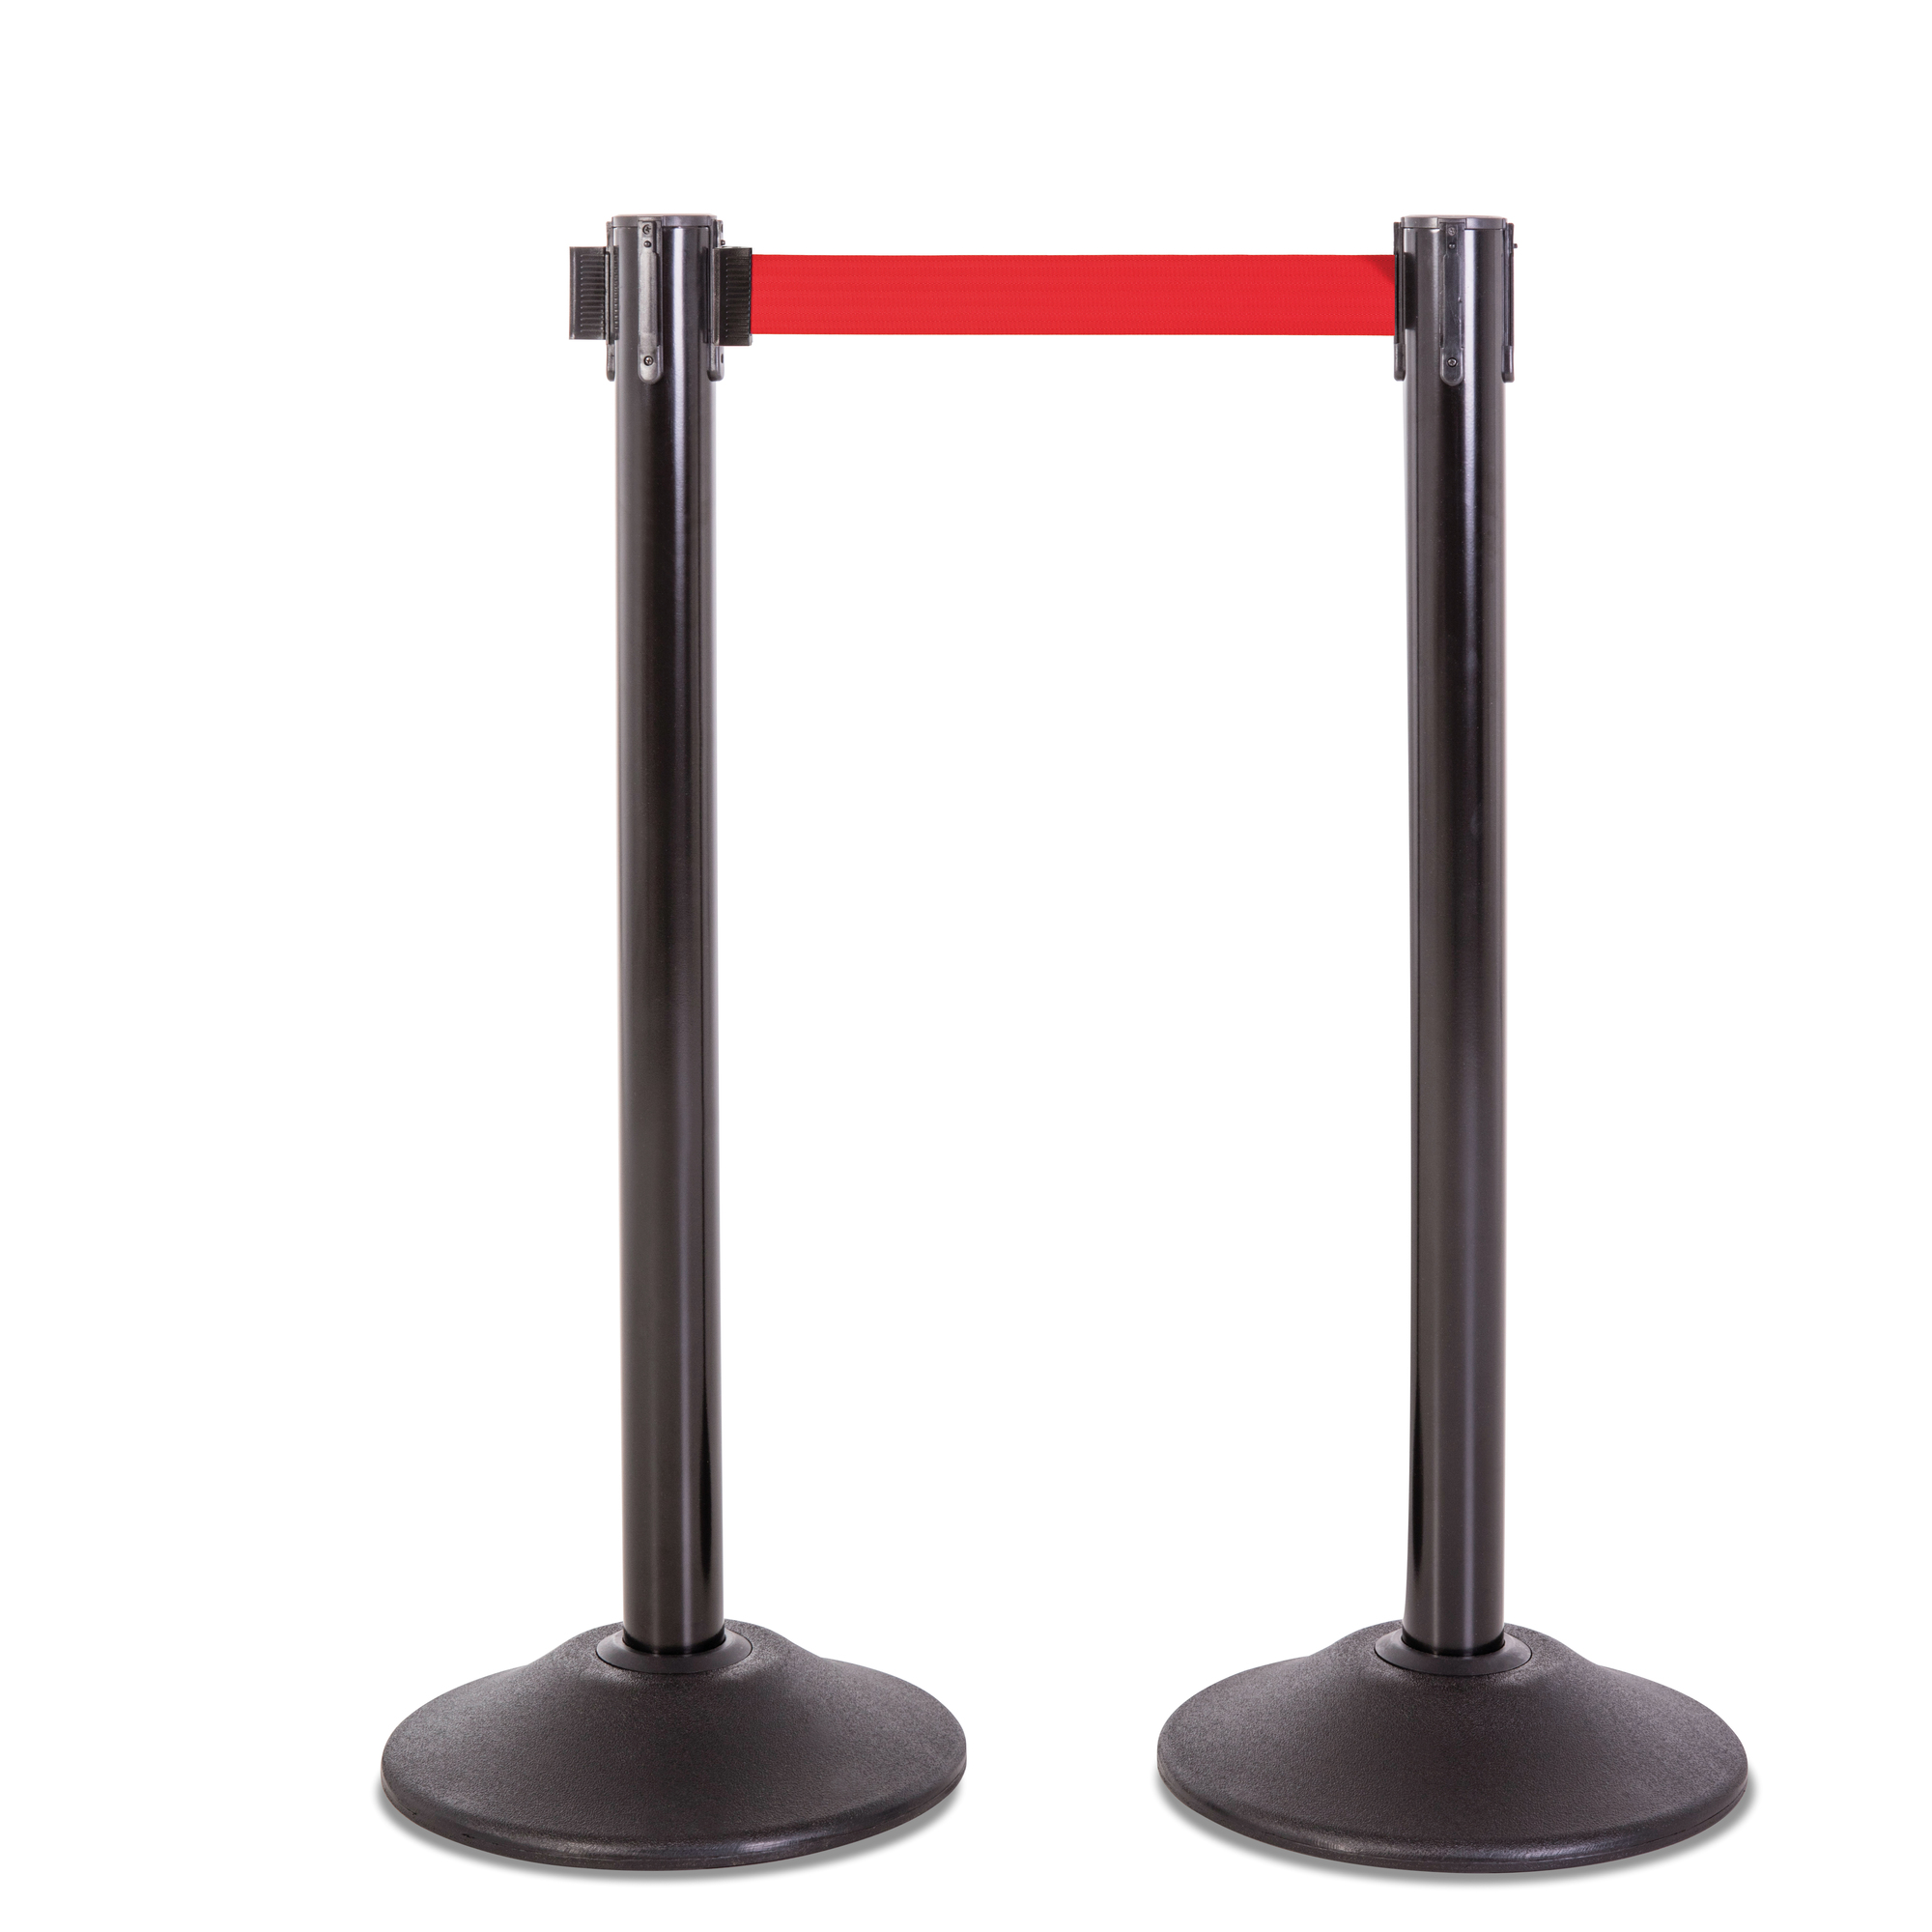 US Weight, Black post and 7.5ft. Red Belt - 2 pack, Model U2102RED